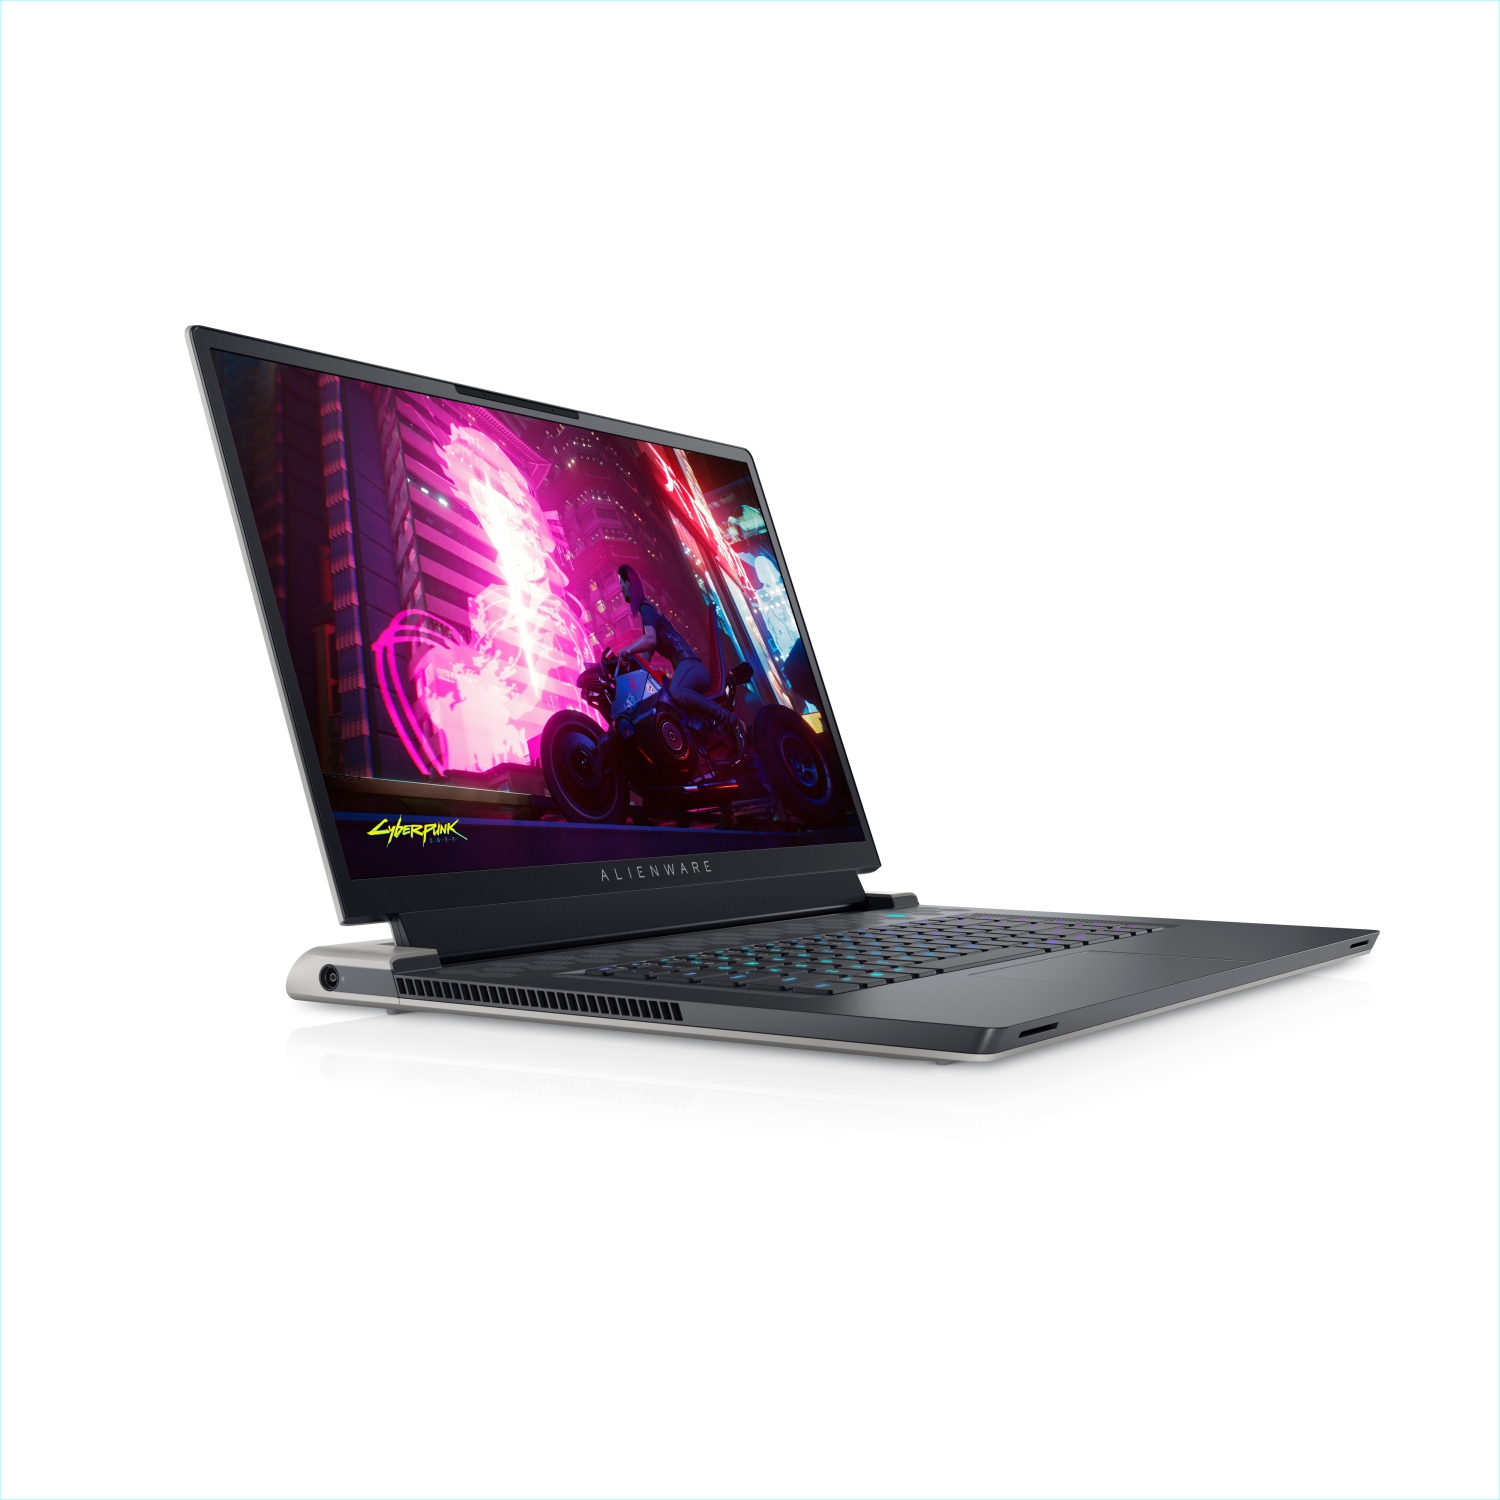 Refurbished (Excellent) - Dell Alienware X17 R1 Gaming Laptop (2021), 17.3" 4K, Core i7, 256GB SSD, 16GB RAM, RTX 3060, 8 Cores @ 4.6 GHz, 11th Gen CPU Certified